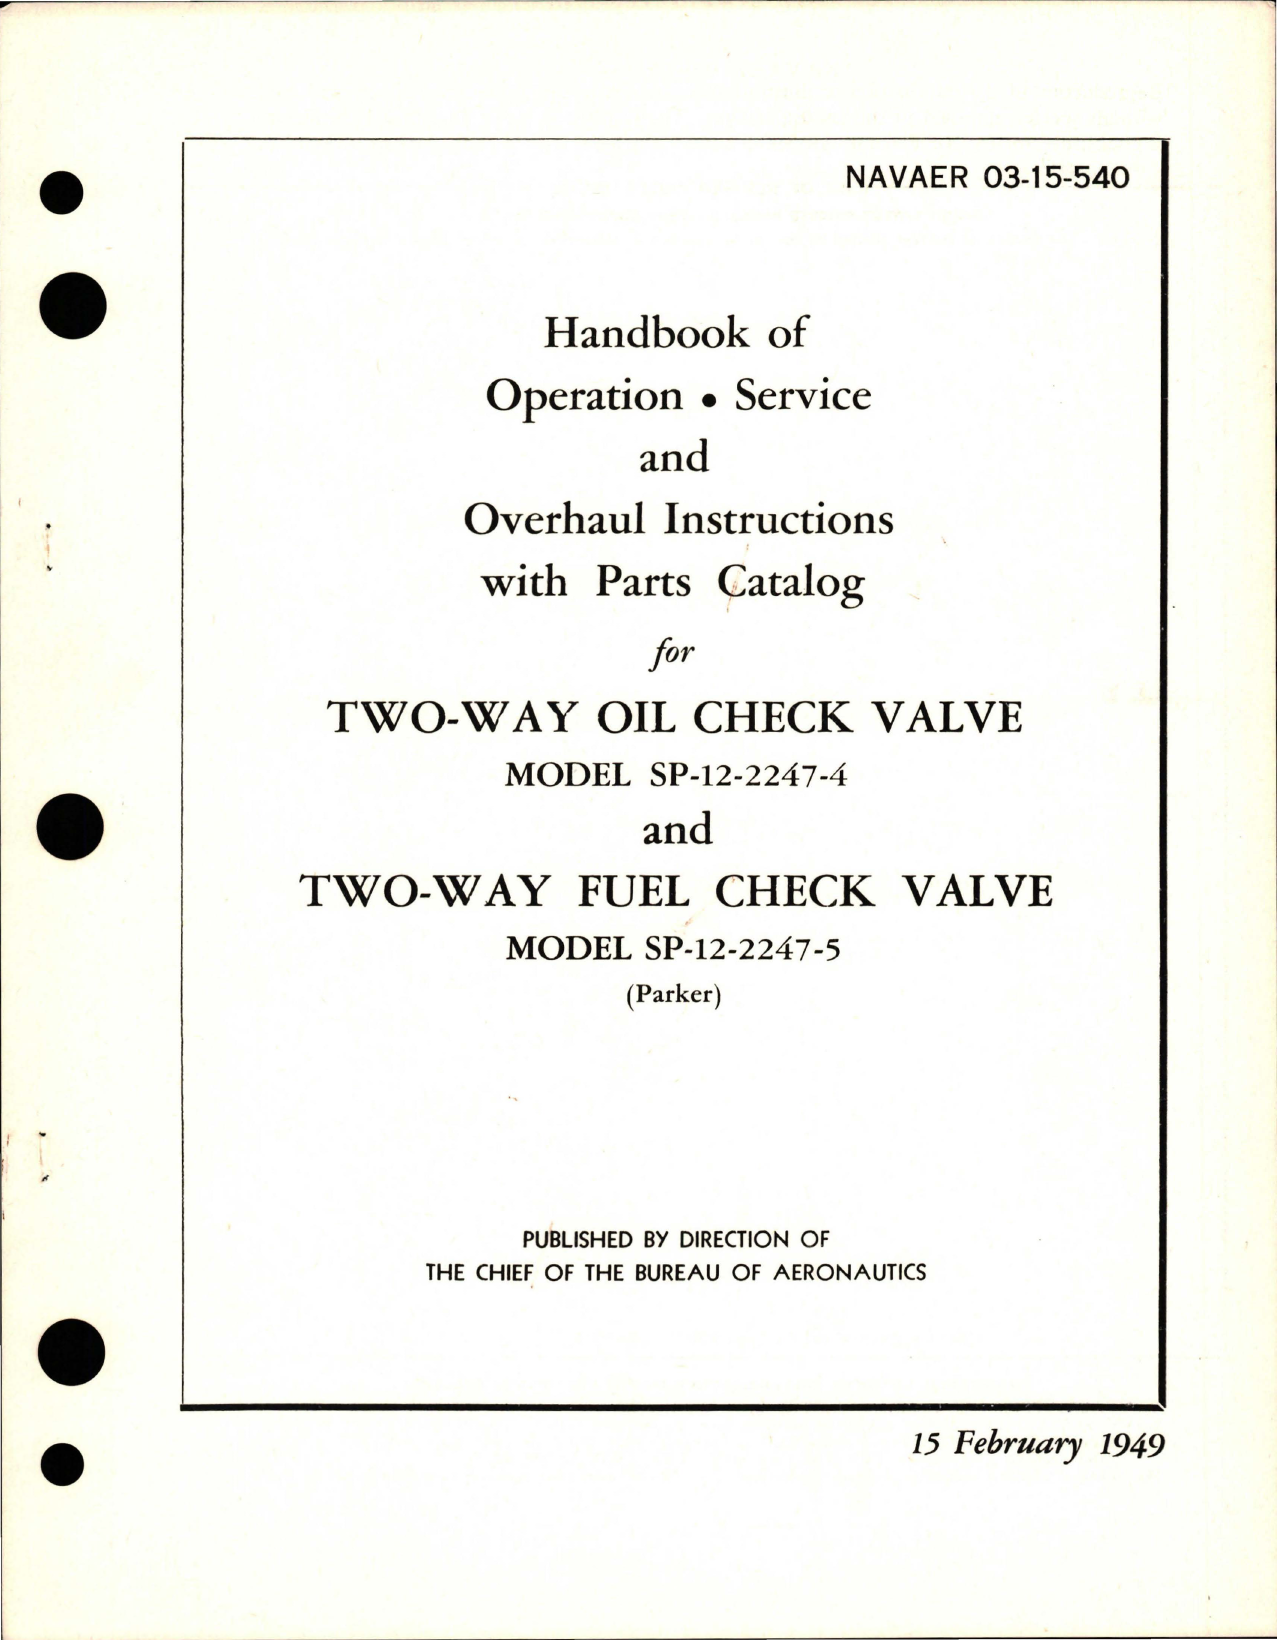 Sample page 1 from AirCorps Library document: Operation, Service and Overhaul Instructions with Parts for Two-Way Oil Check Valve and Two-Way Fuel Check Valve